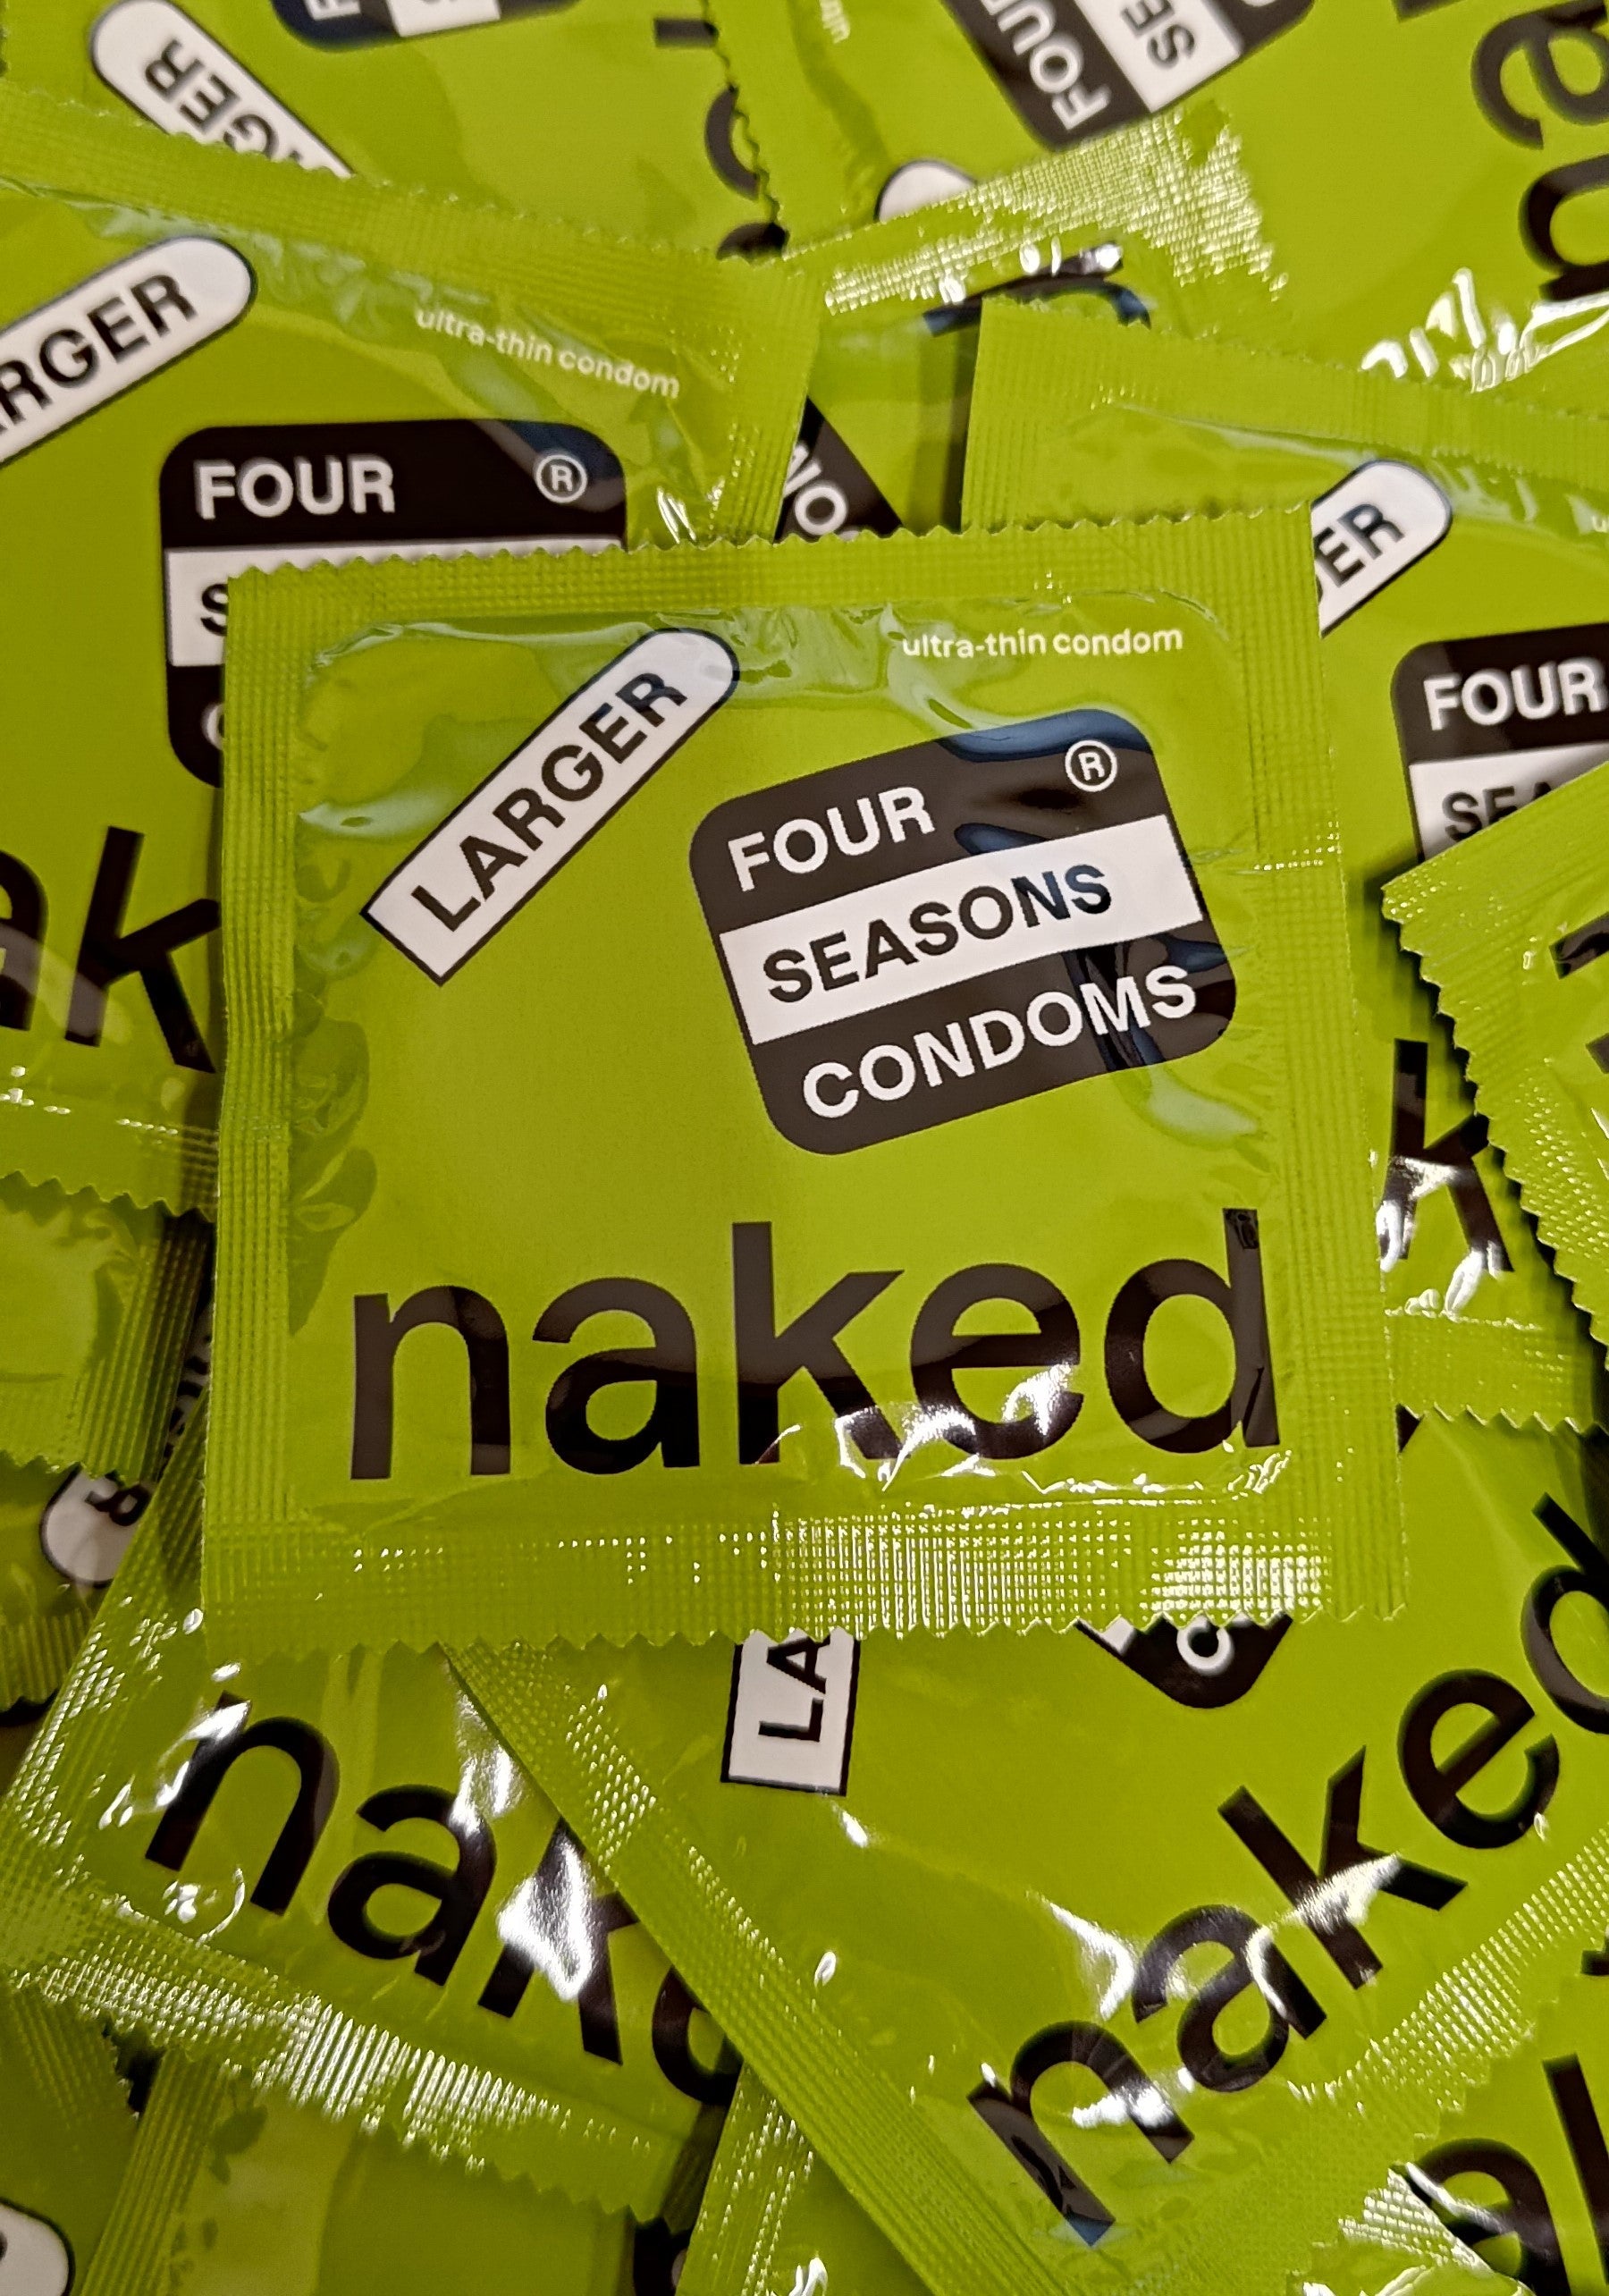 Four Seasons Naked Larger 72 Condoms